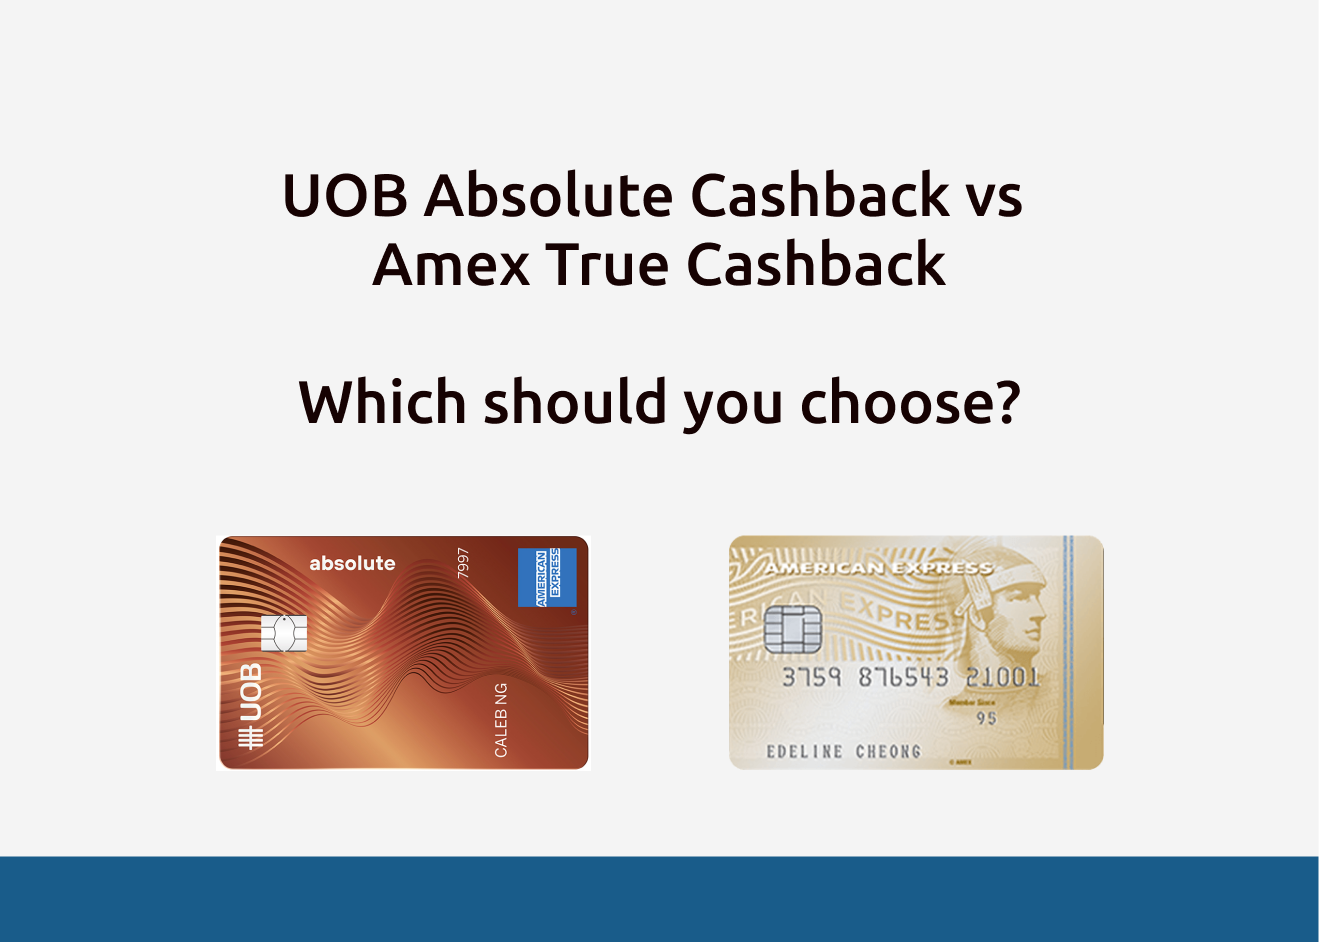 uob-absolute-cashback-vs-amex-true-cashback-which-is-better